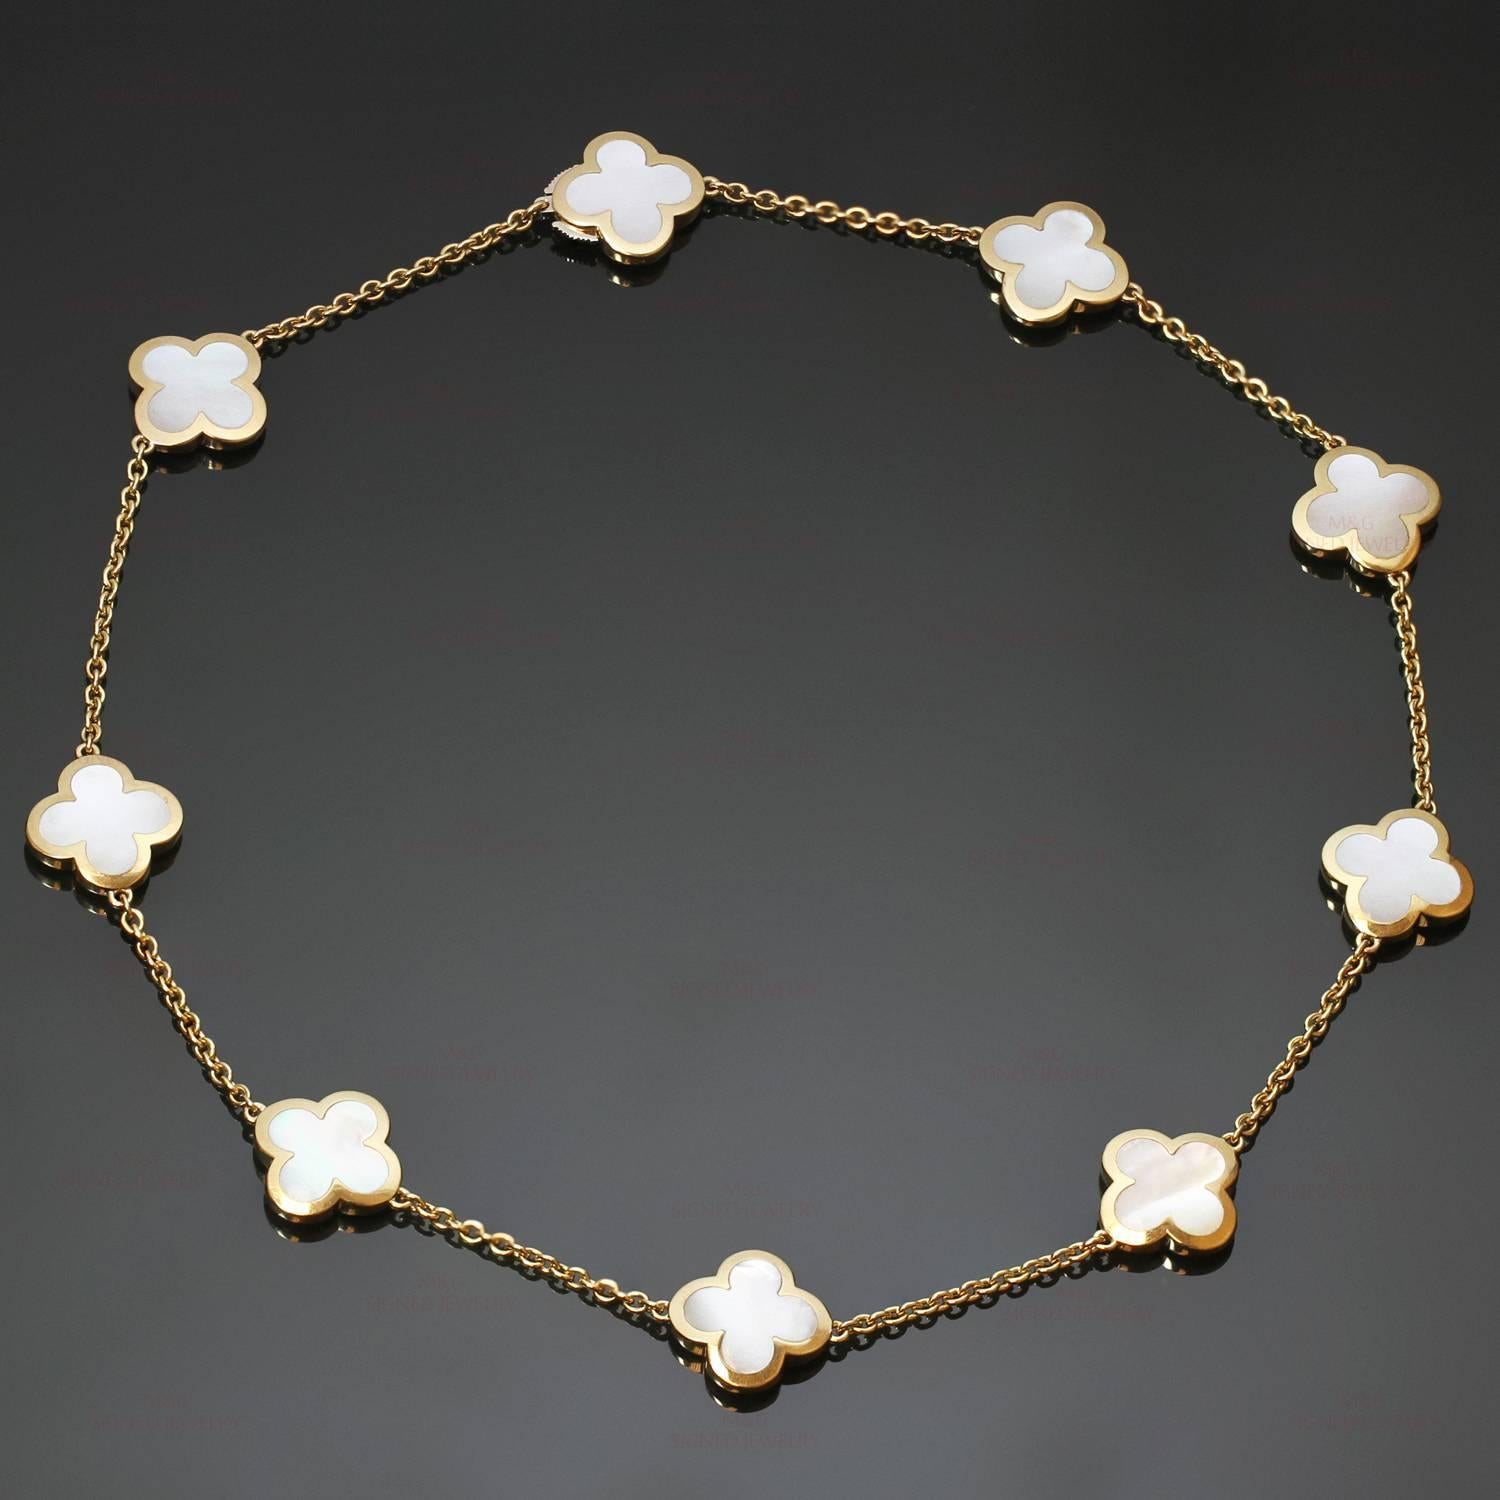 This classic Van Cleef & Arpels necklace from the Pure Alhambra collection is crafted in 18k yellow gold and features 9 lucky clover motifs beautifully inlaid with mother-of-pearl. Made in France circa 2000s. Measurements: 0.62